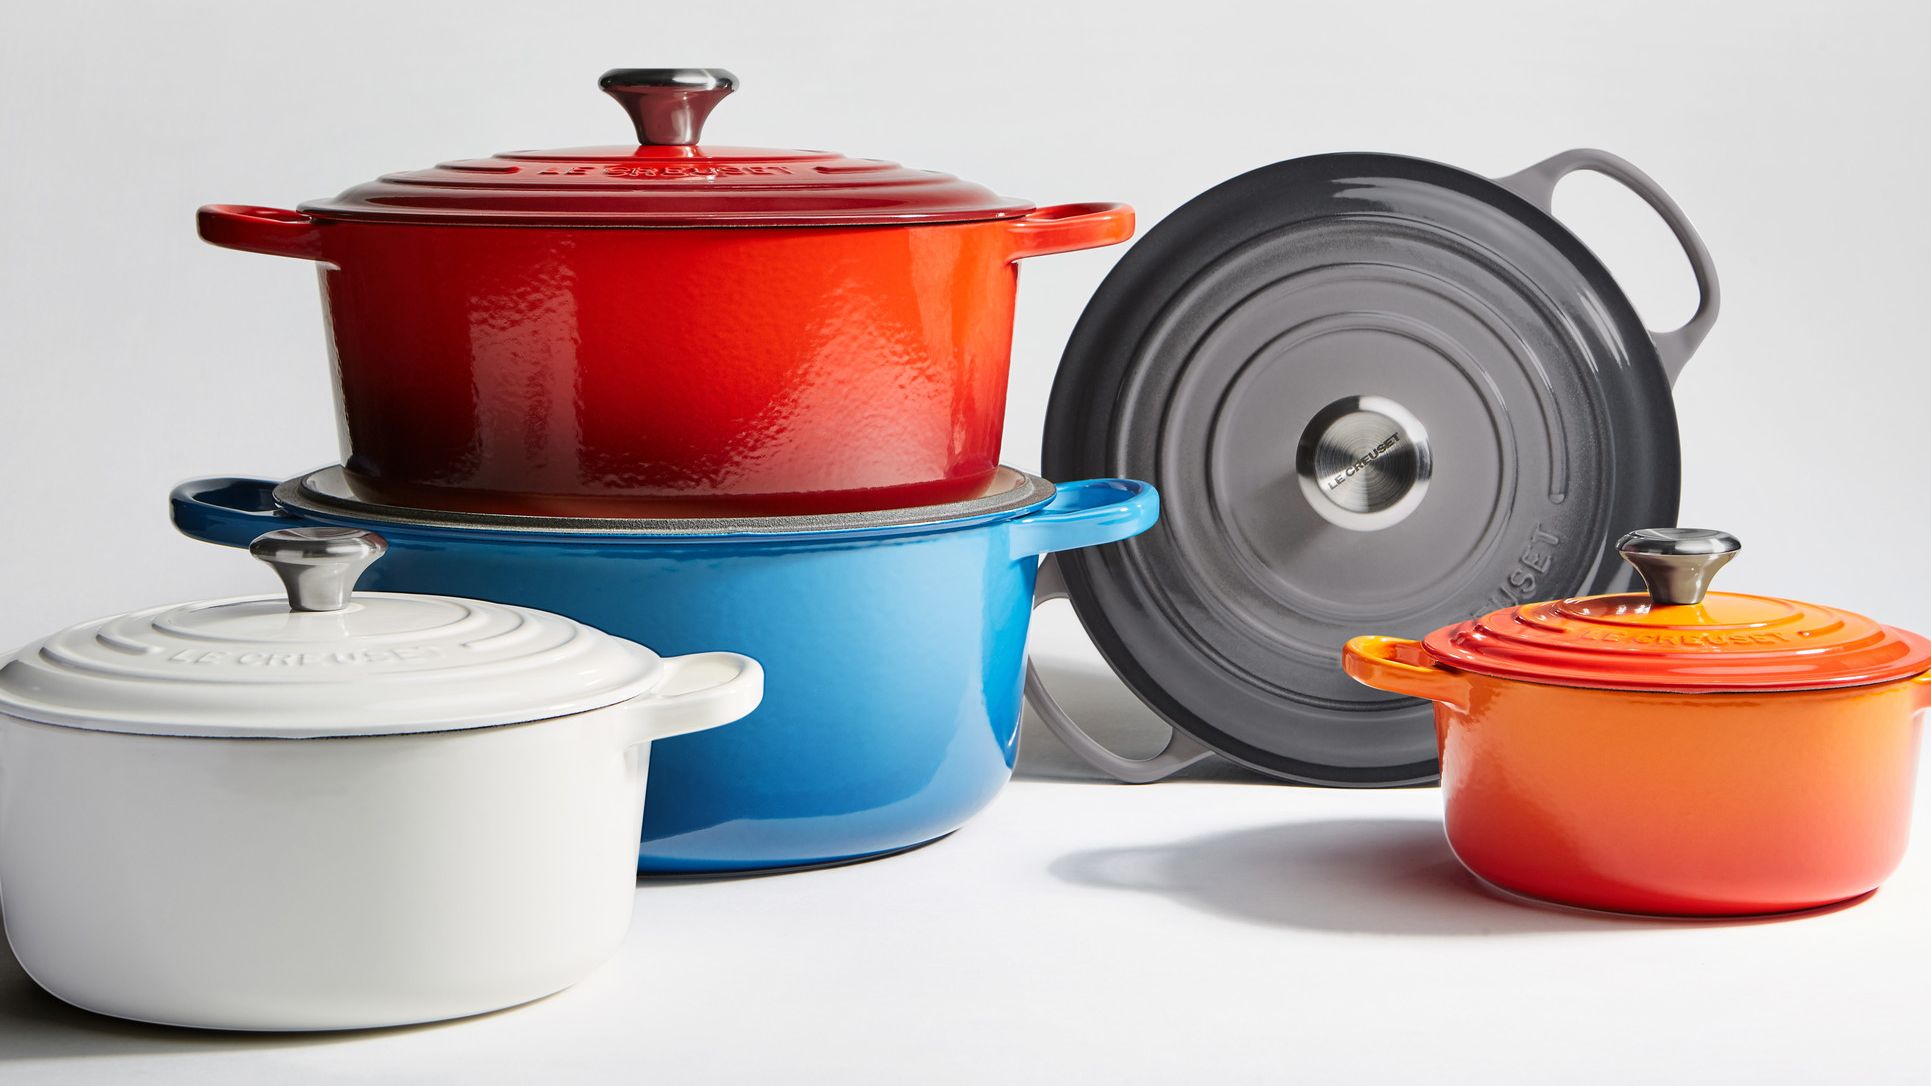 Le Creuset on Twitter: "Legendary cookware, unbelievable value: For the first time ever, get 20% off all full-price items plus free shipping on all orders. 🙌 Shop https://t.co/8Fw4XLc6KU. *Prices as marked,